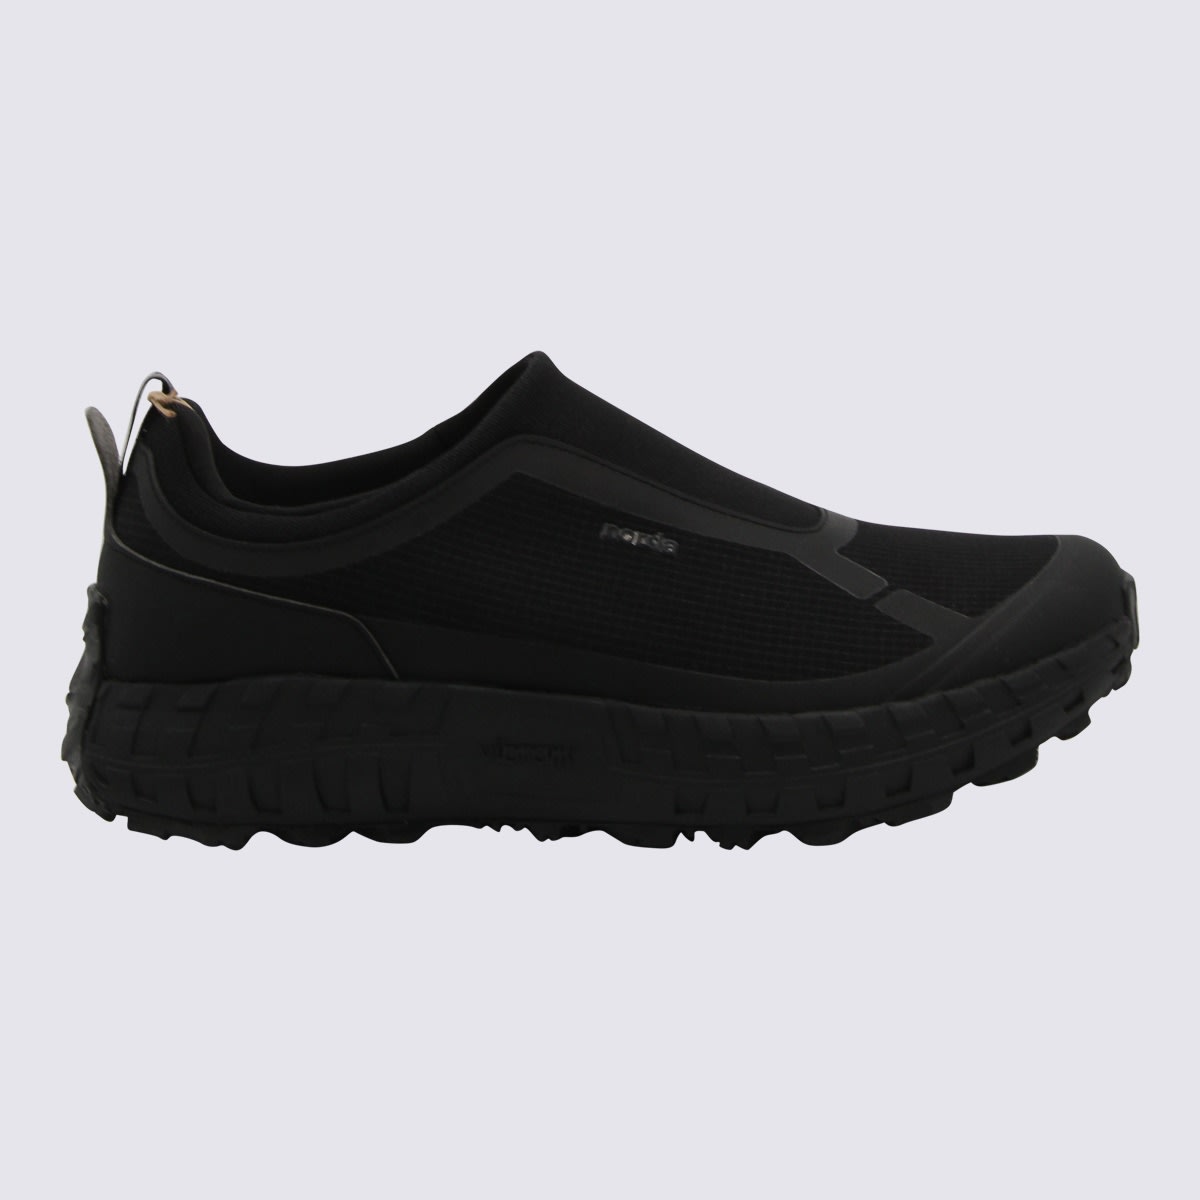 Black The 003 W Pitch Sneakers